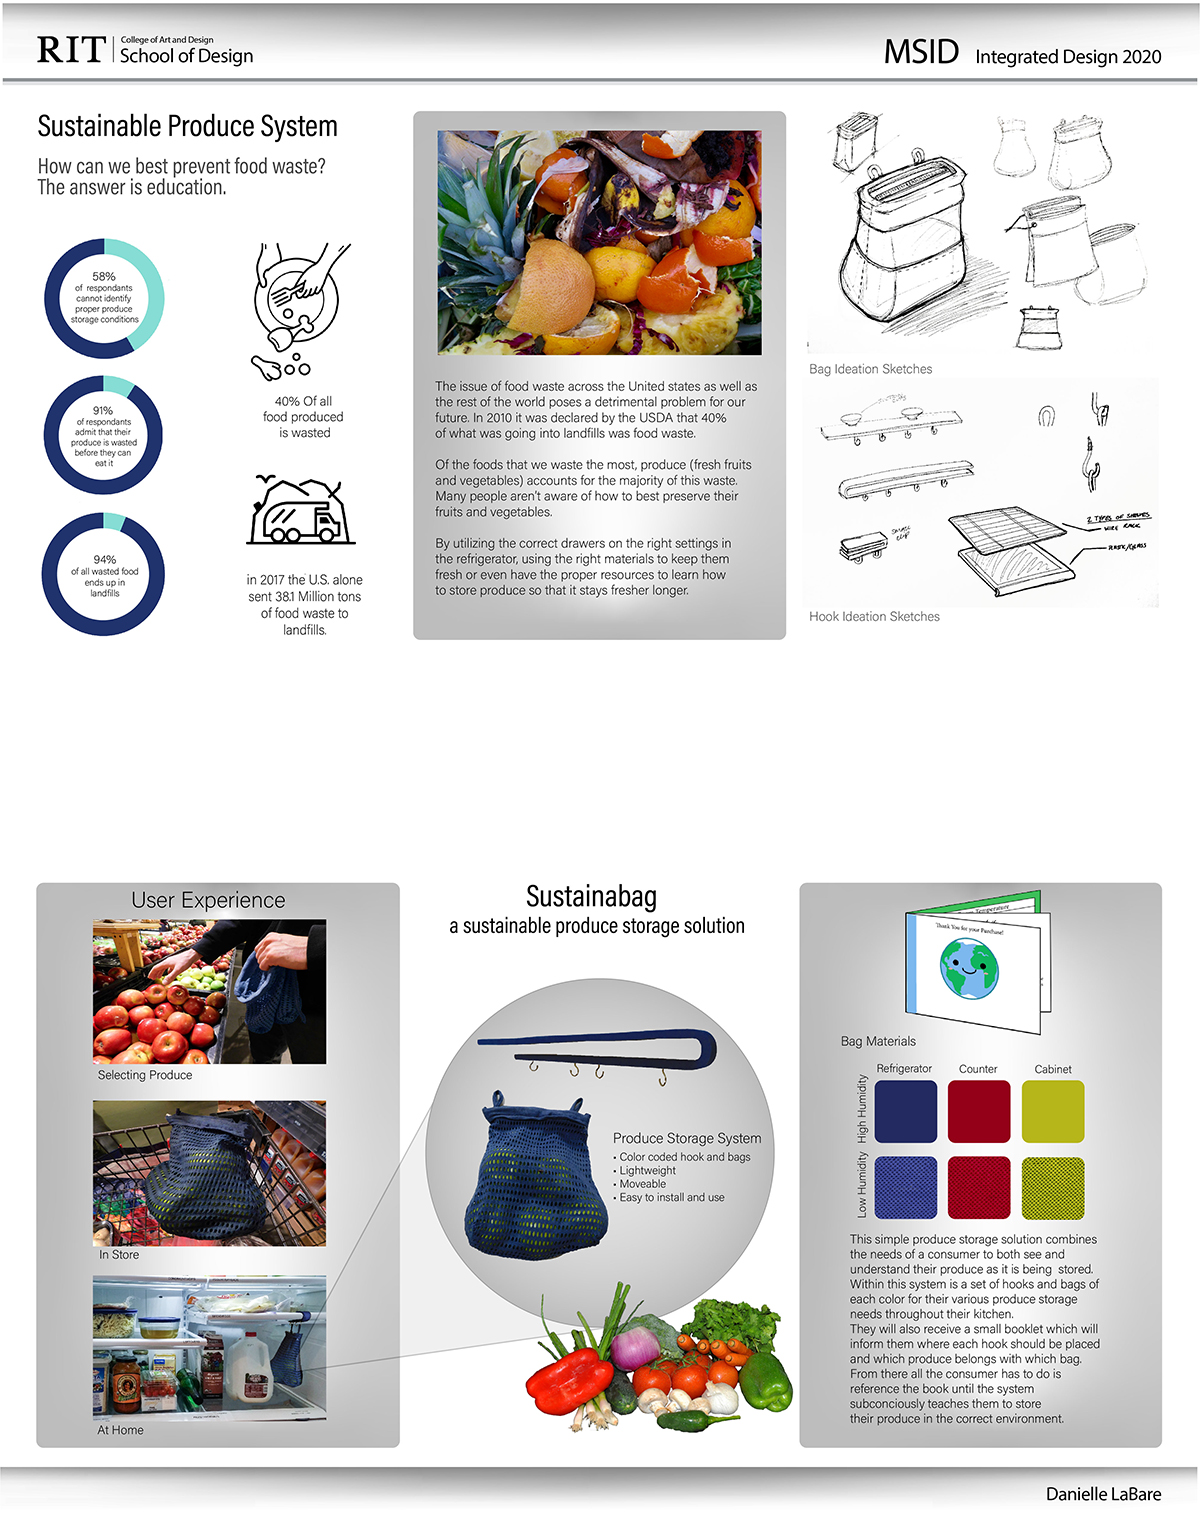 A poster for a sustainable produce system.